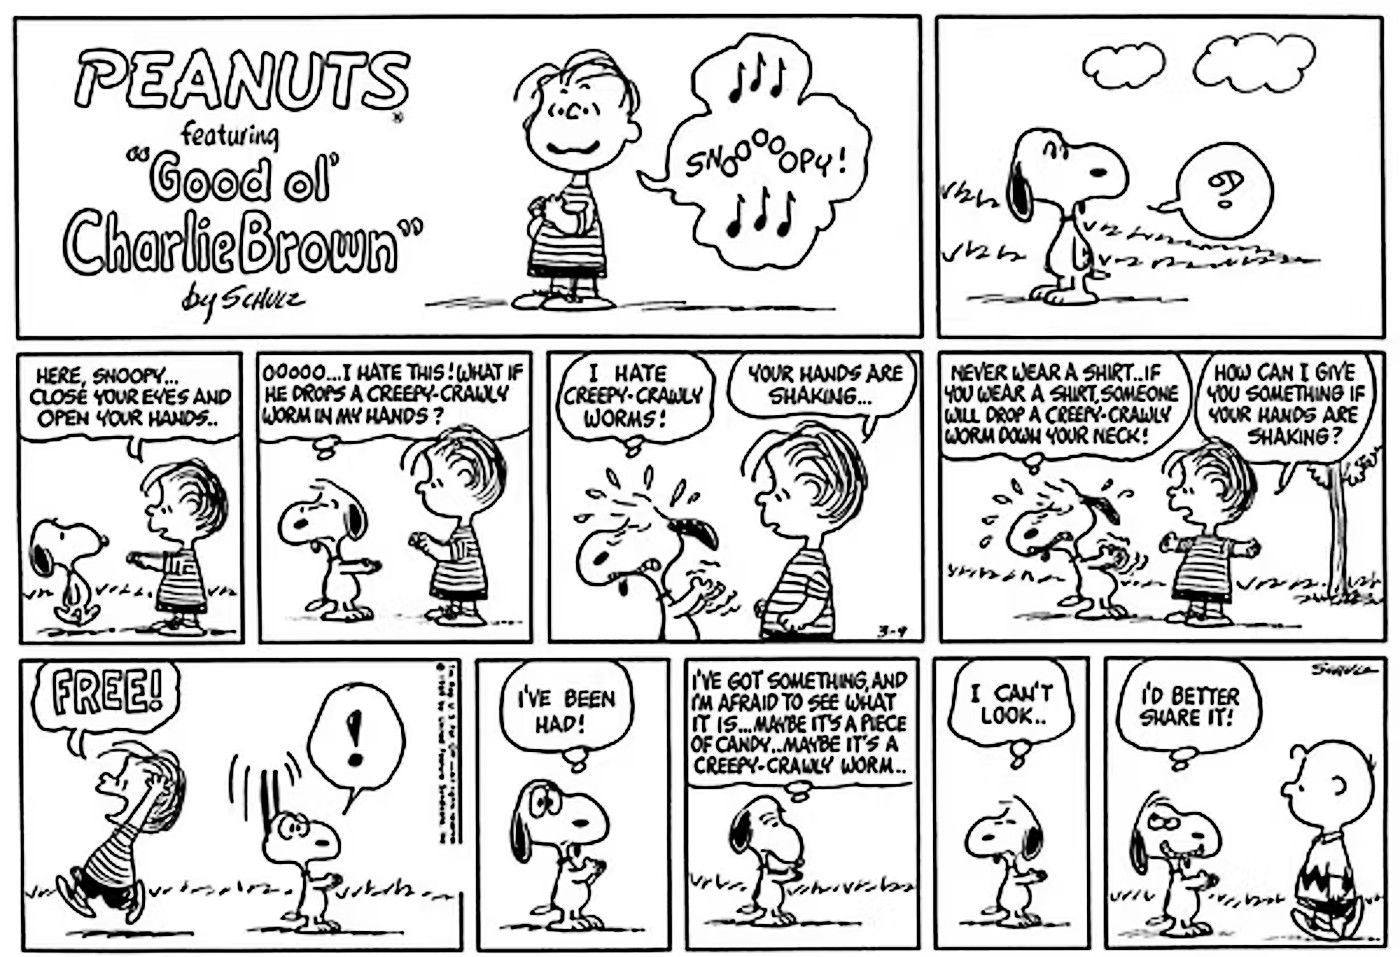 Peanuts, Snoopy is irrationally terrified of 'creepy crawly worms'